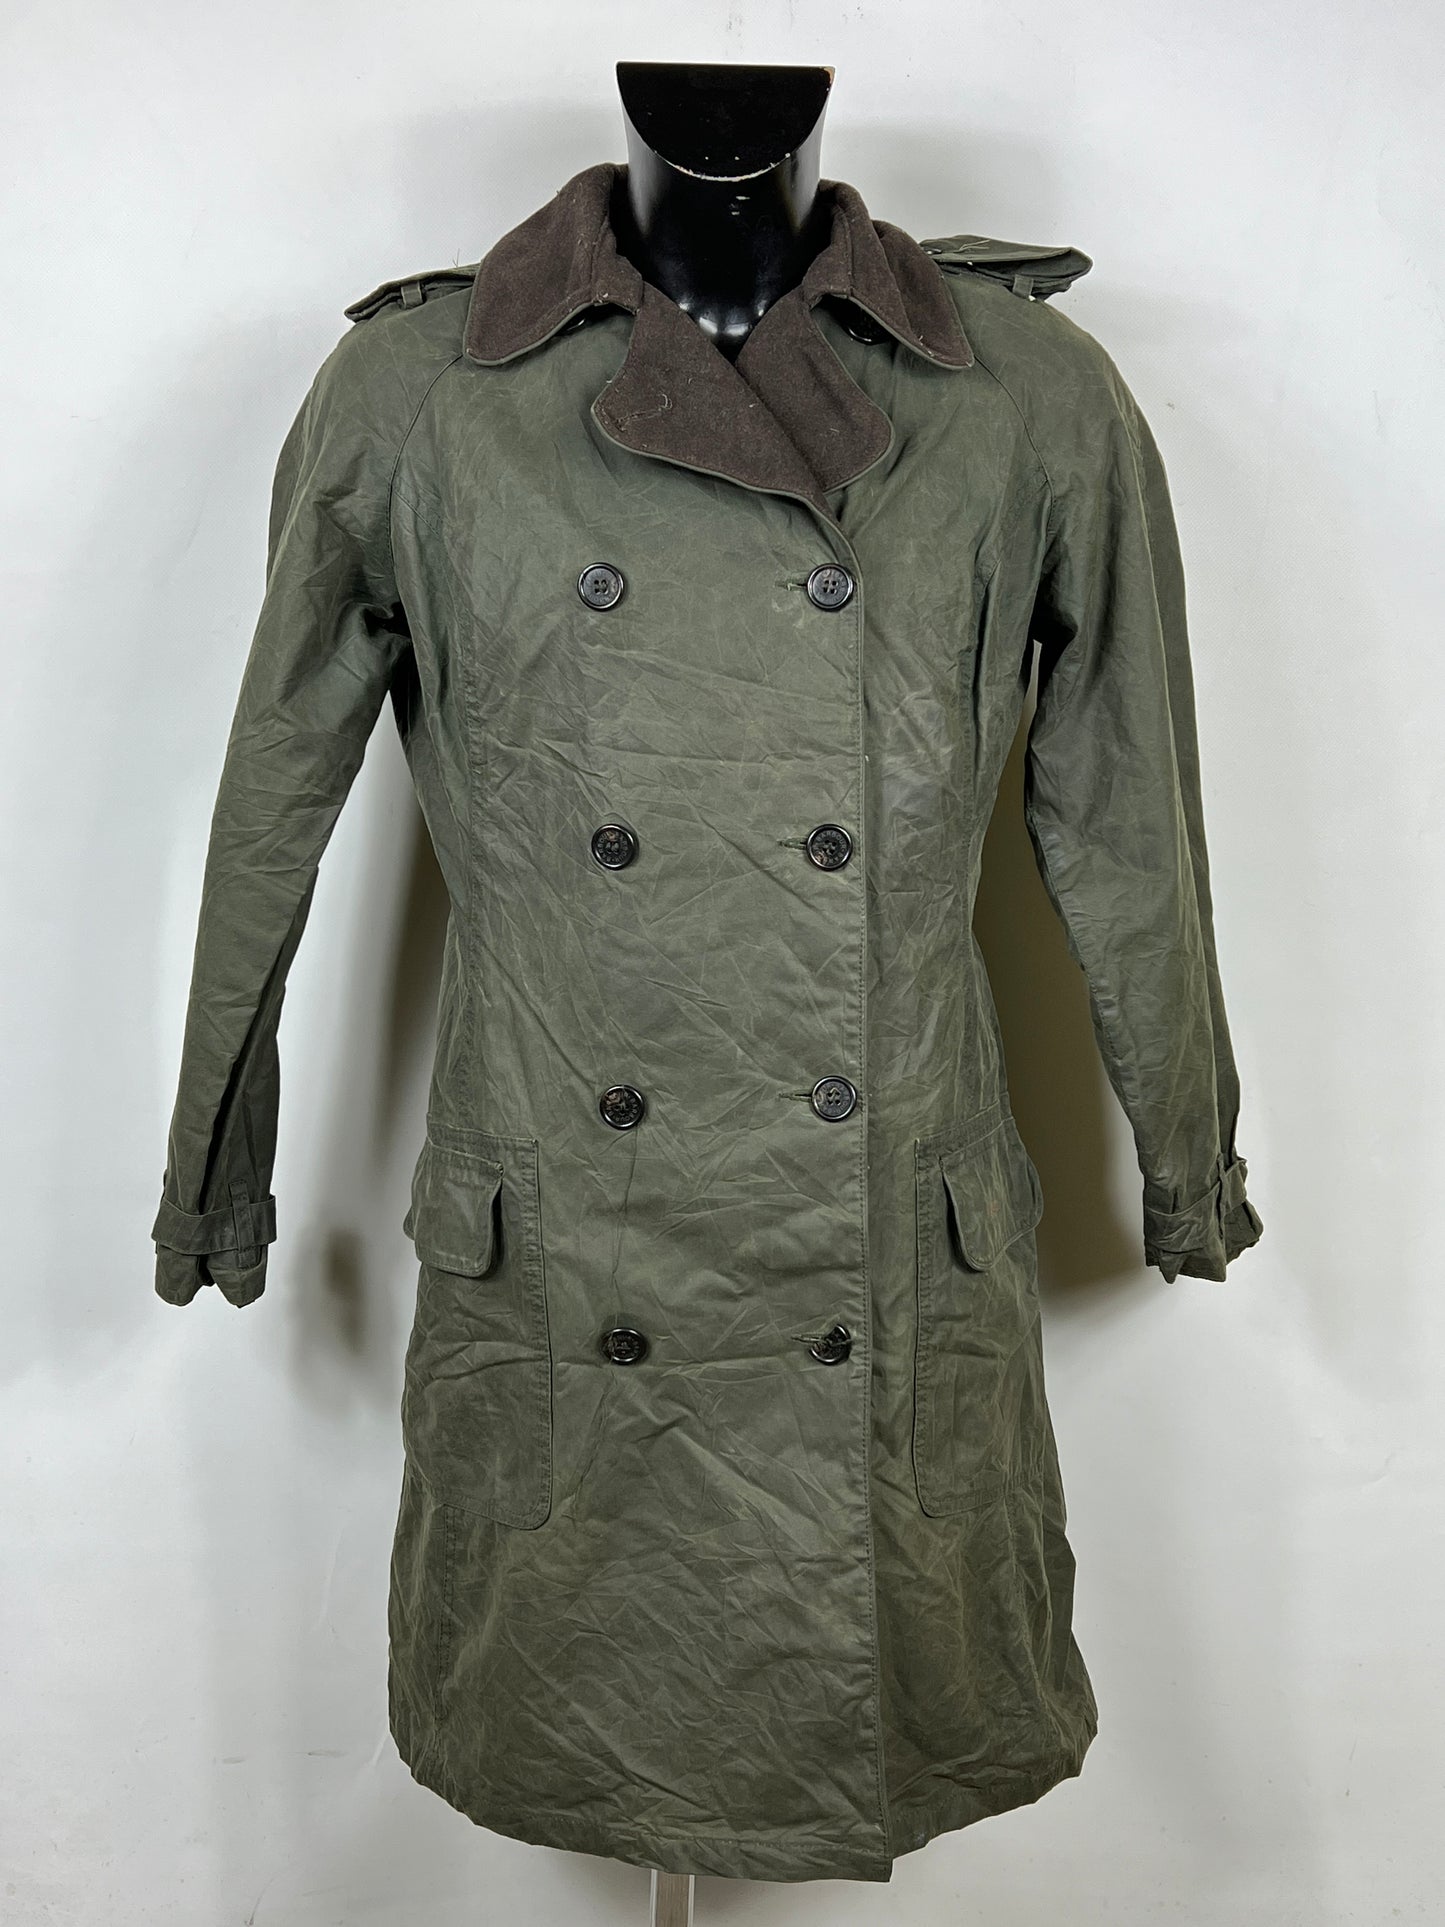 Cappotto Barbour verde modello Valerie Trench tg. 44 UK14- Lady Green wax coat